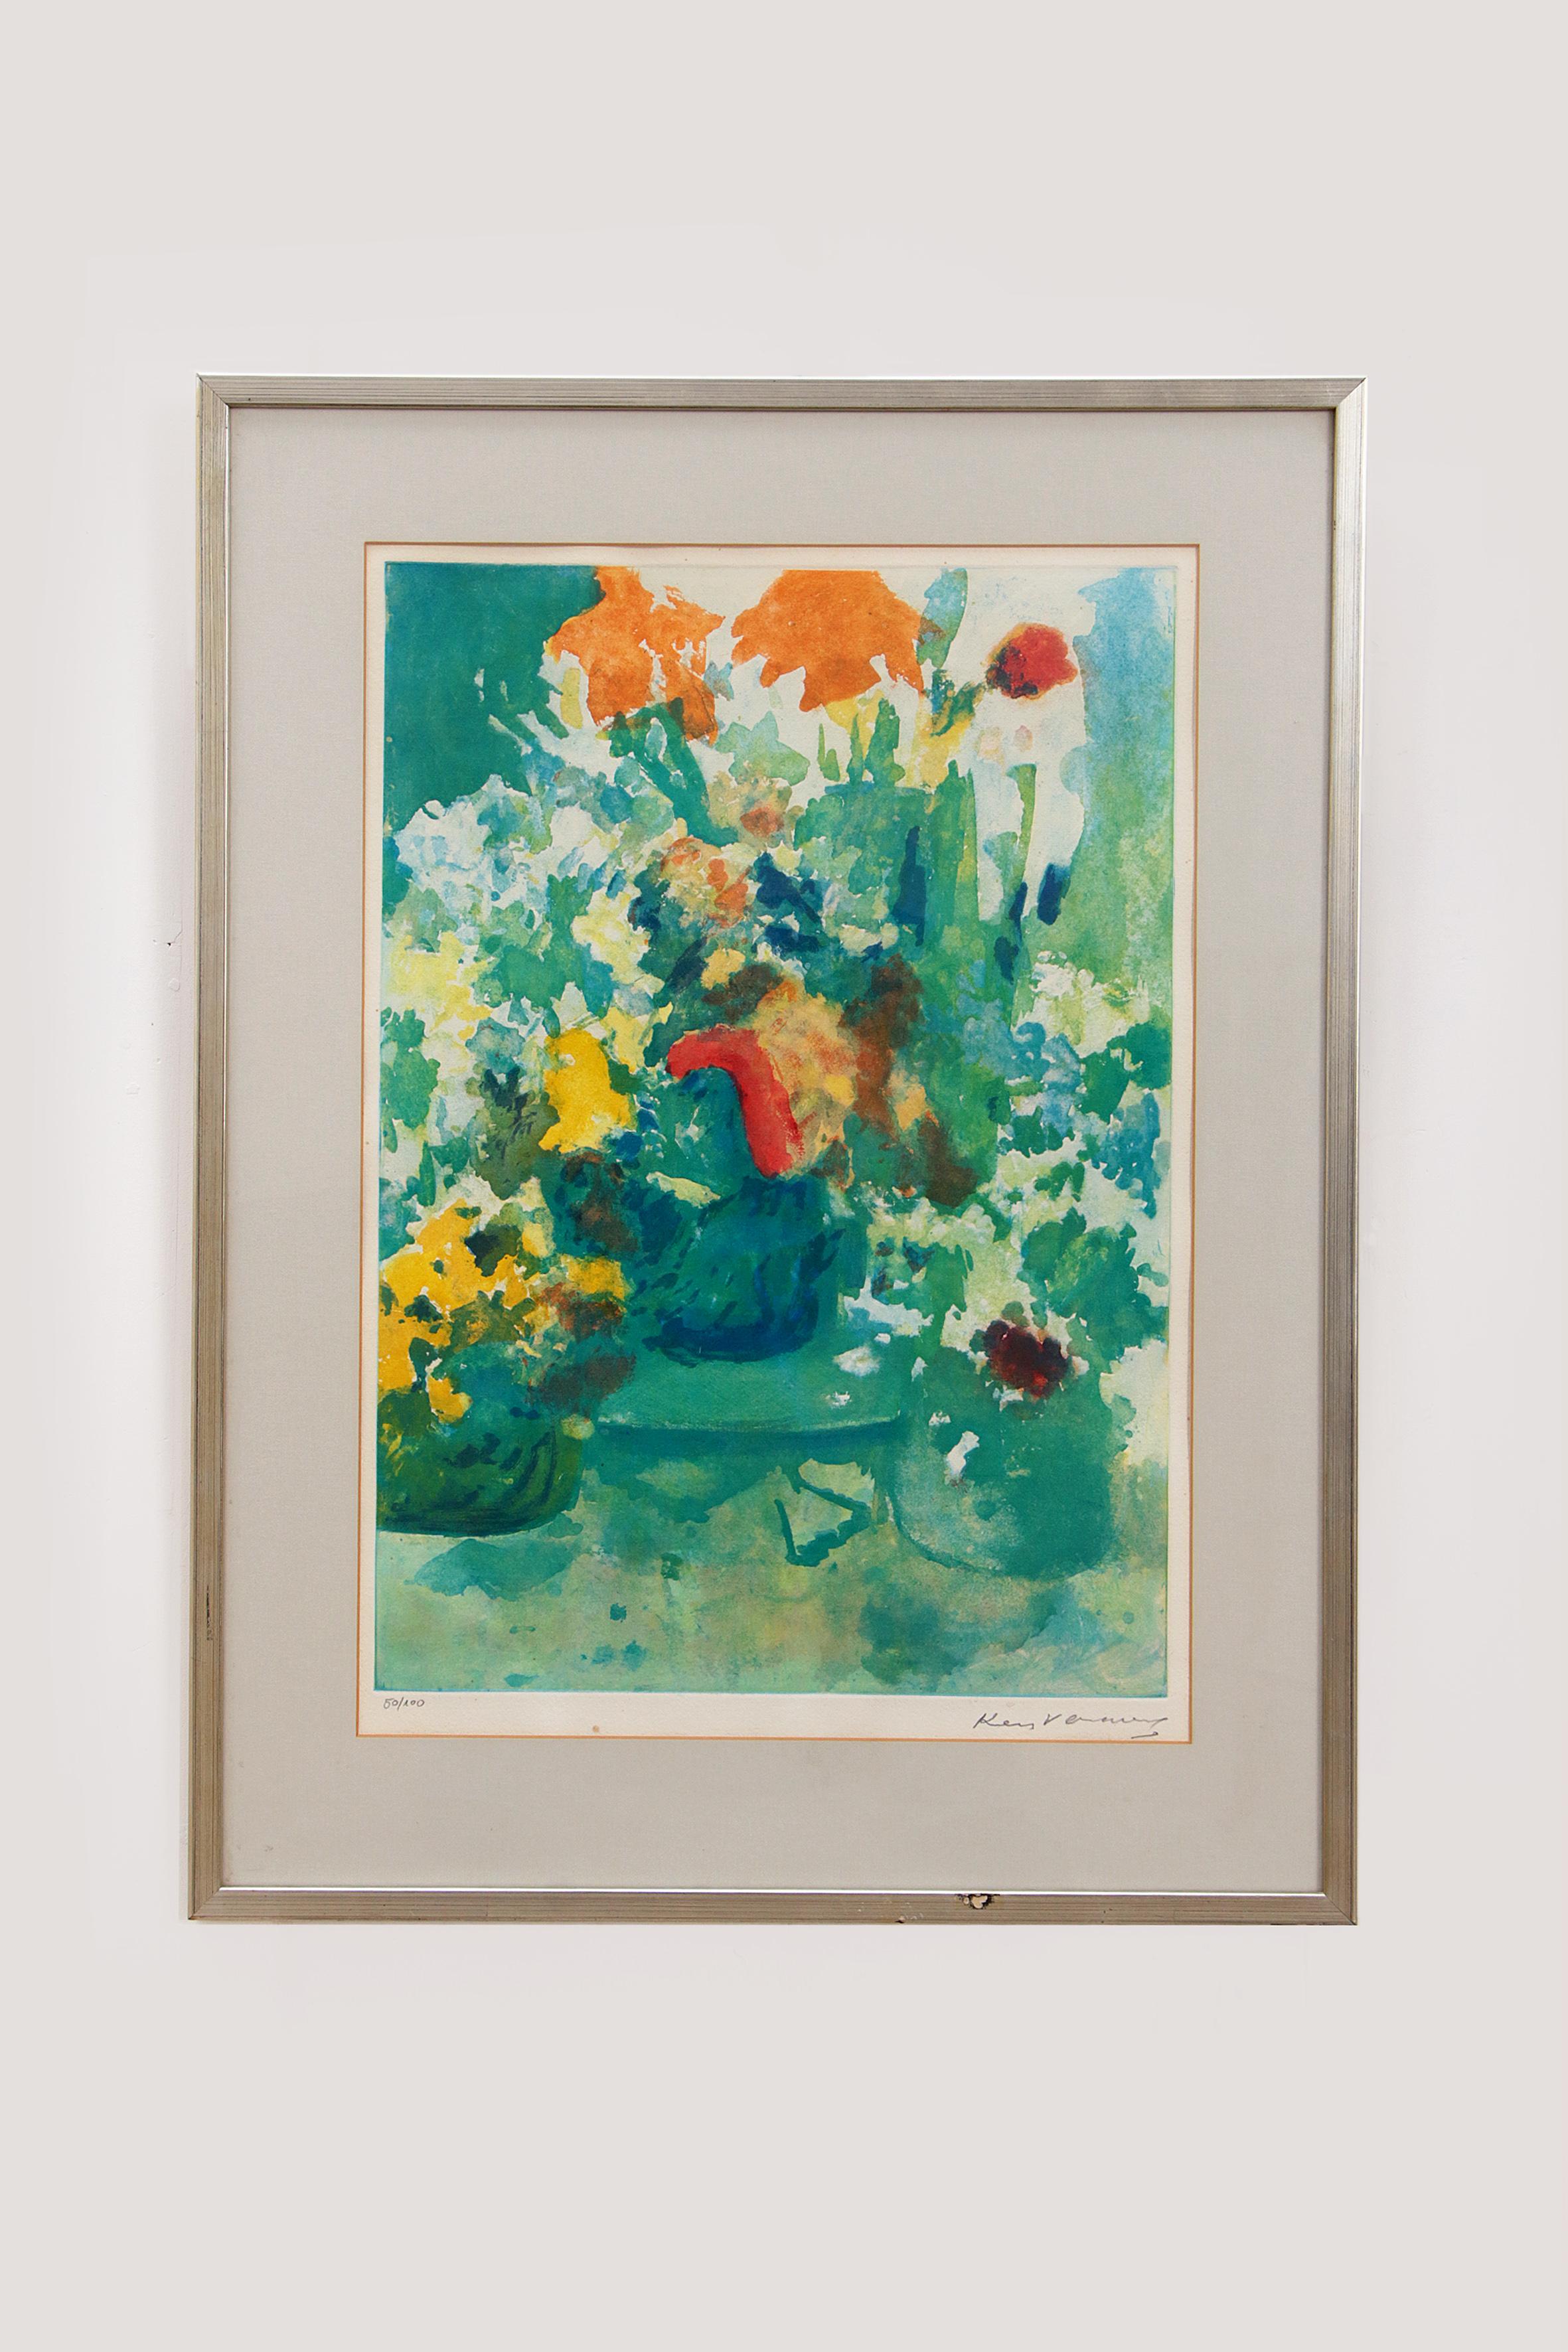 Beautiful painting by Kees Verwey Flower Still Life Signed (1900-1995) Haarlem.


This is a beautiful work by Kees Verwey, signed and numbered 50/100.

The Haarlem painter Kees Verwey, best known for his watercolors, was a student of J.H.Jurres.

He